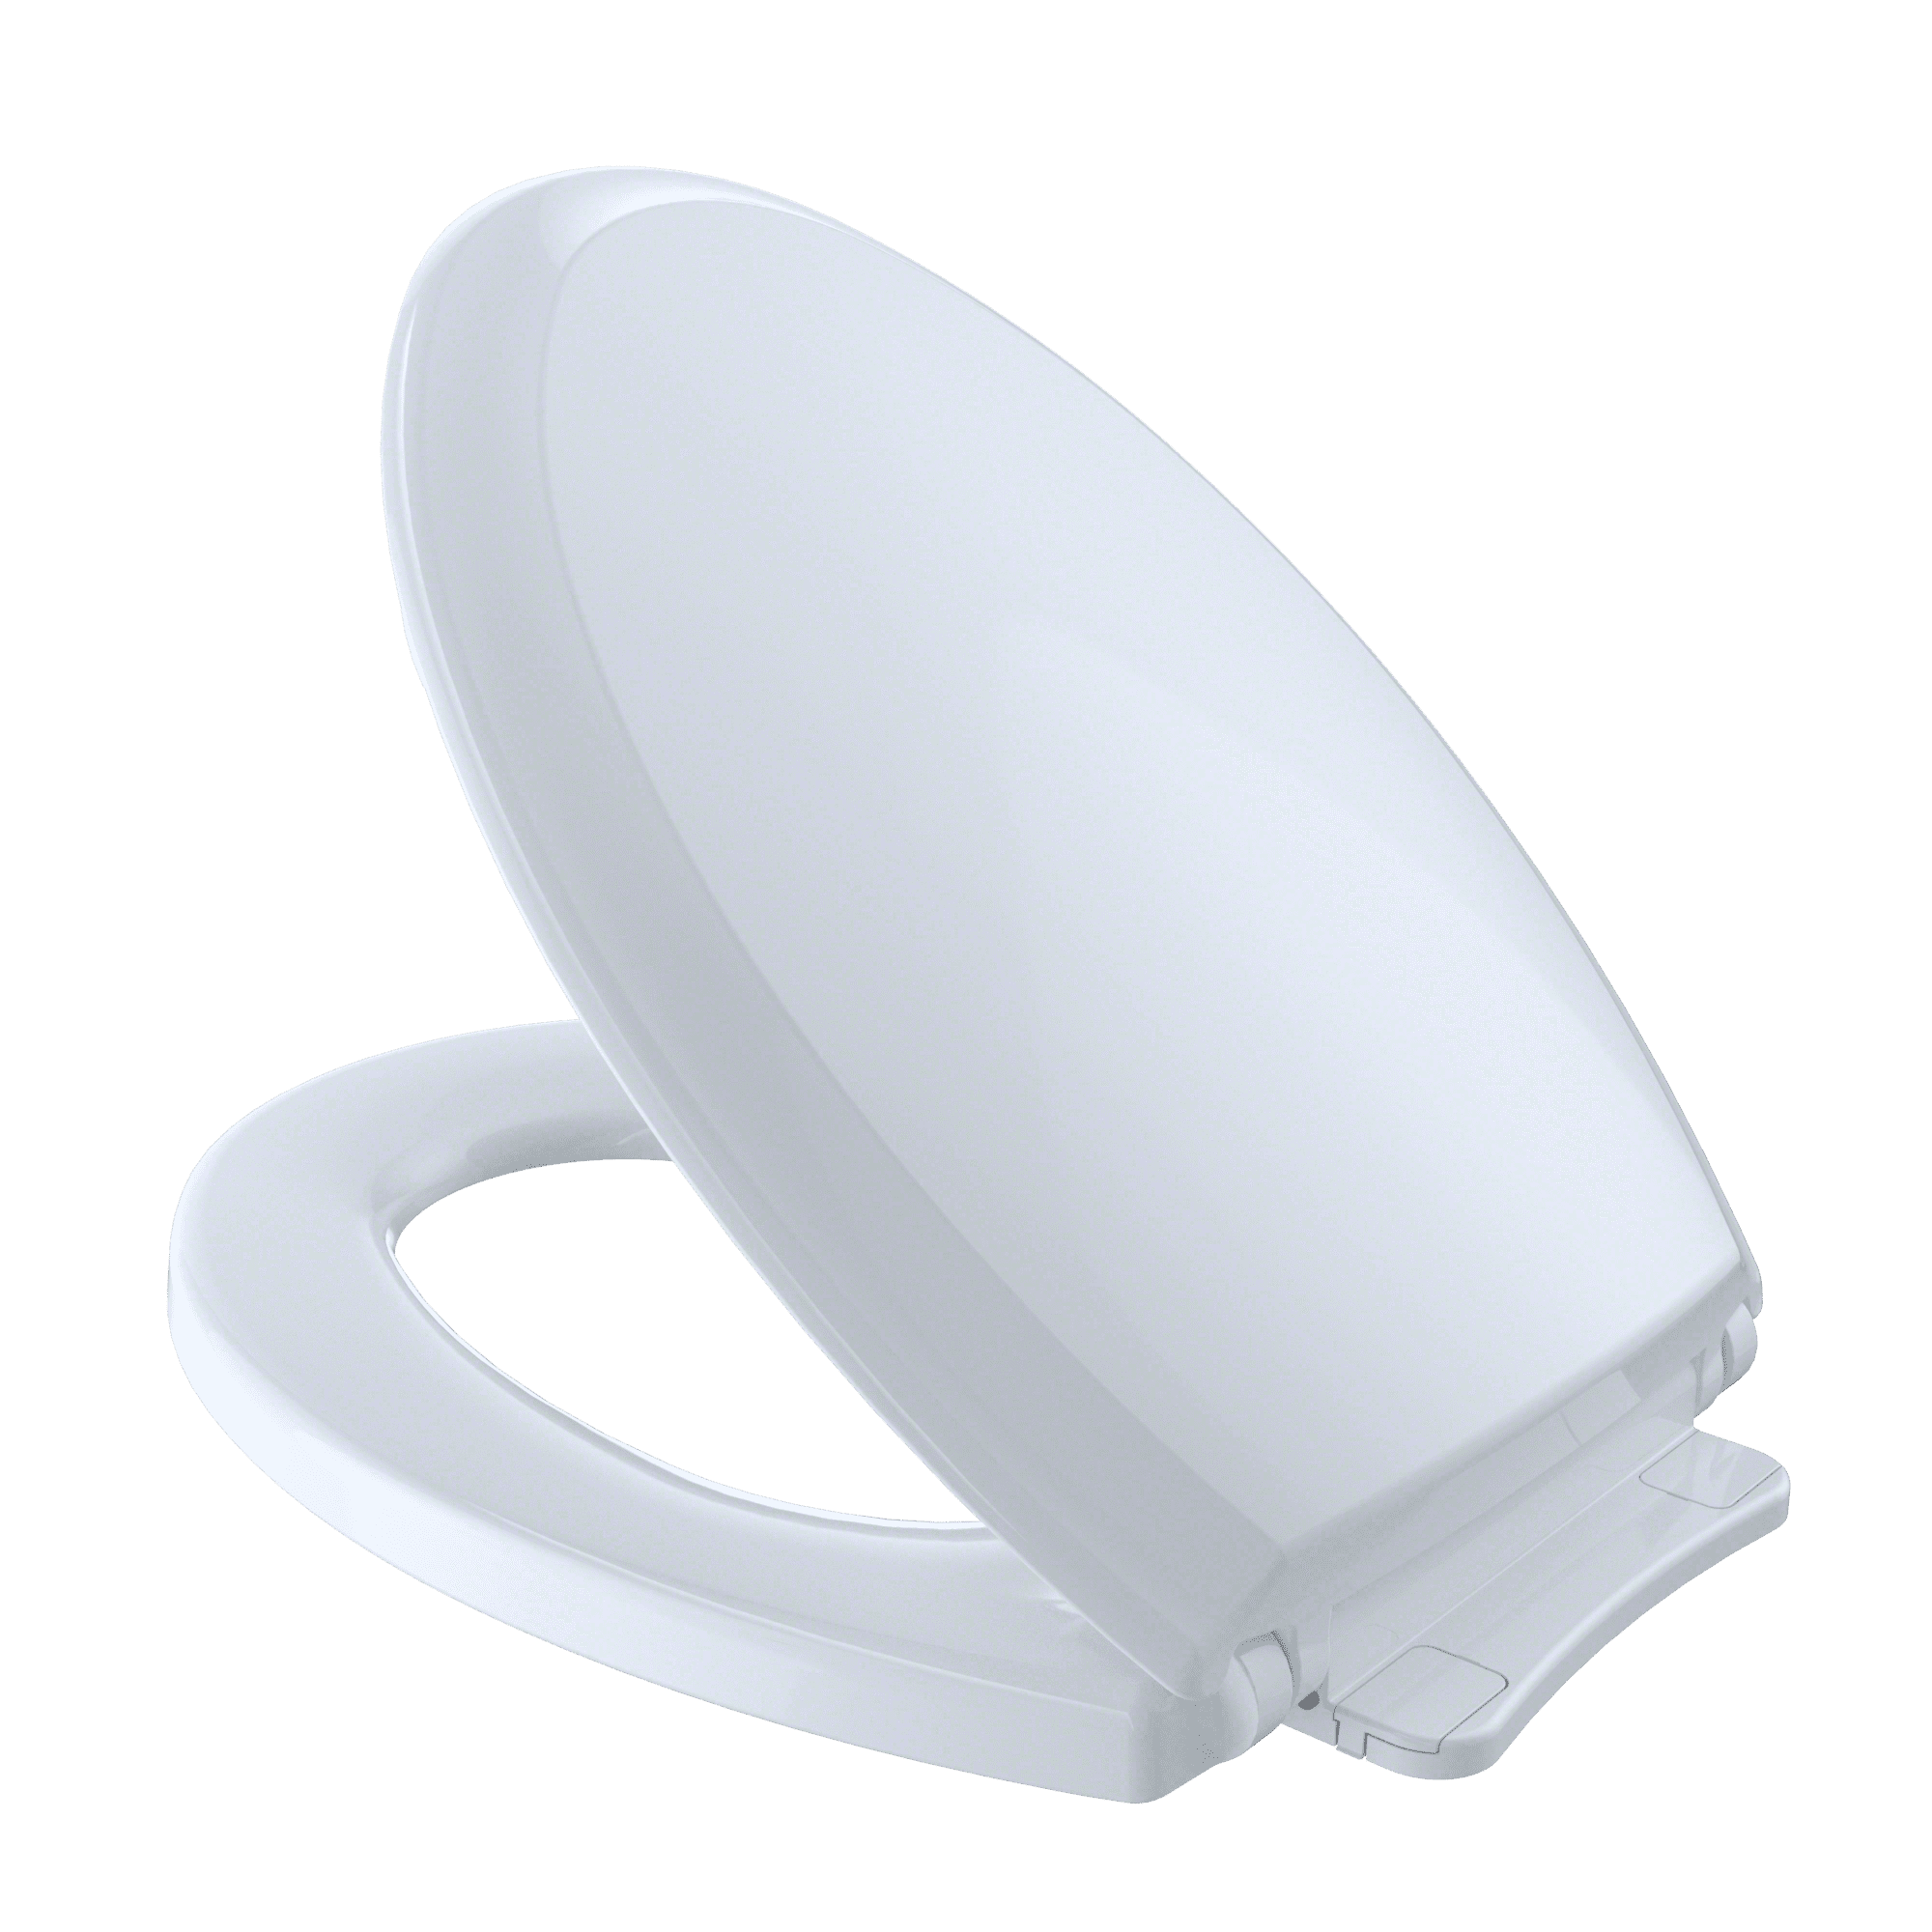 Ss22401 Guinevere Softclose Elongated Closed Front Toilet Seat In Cotton White